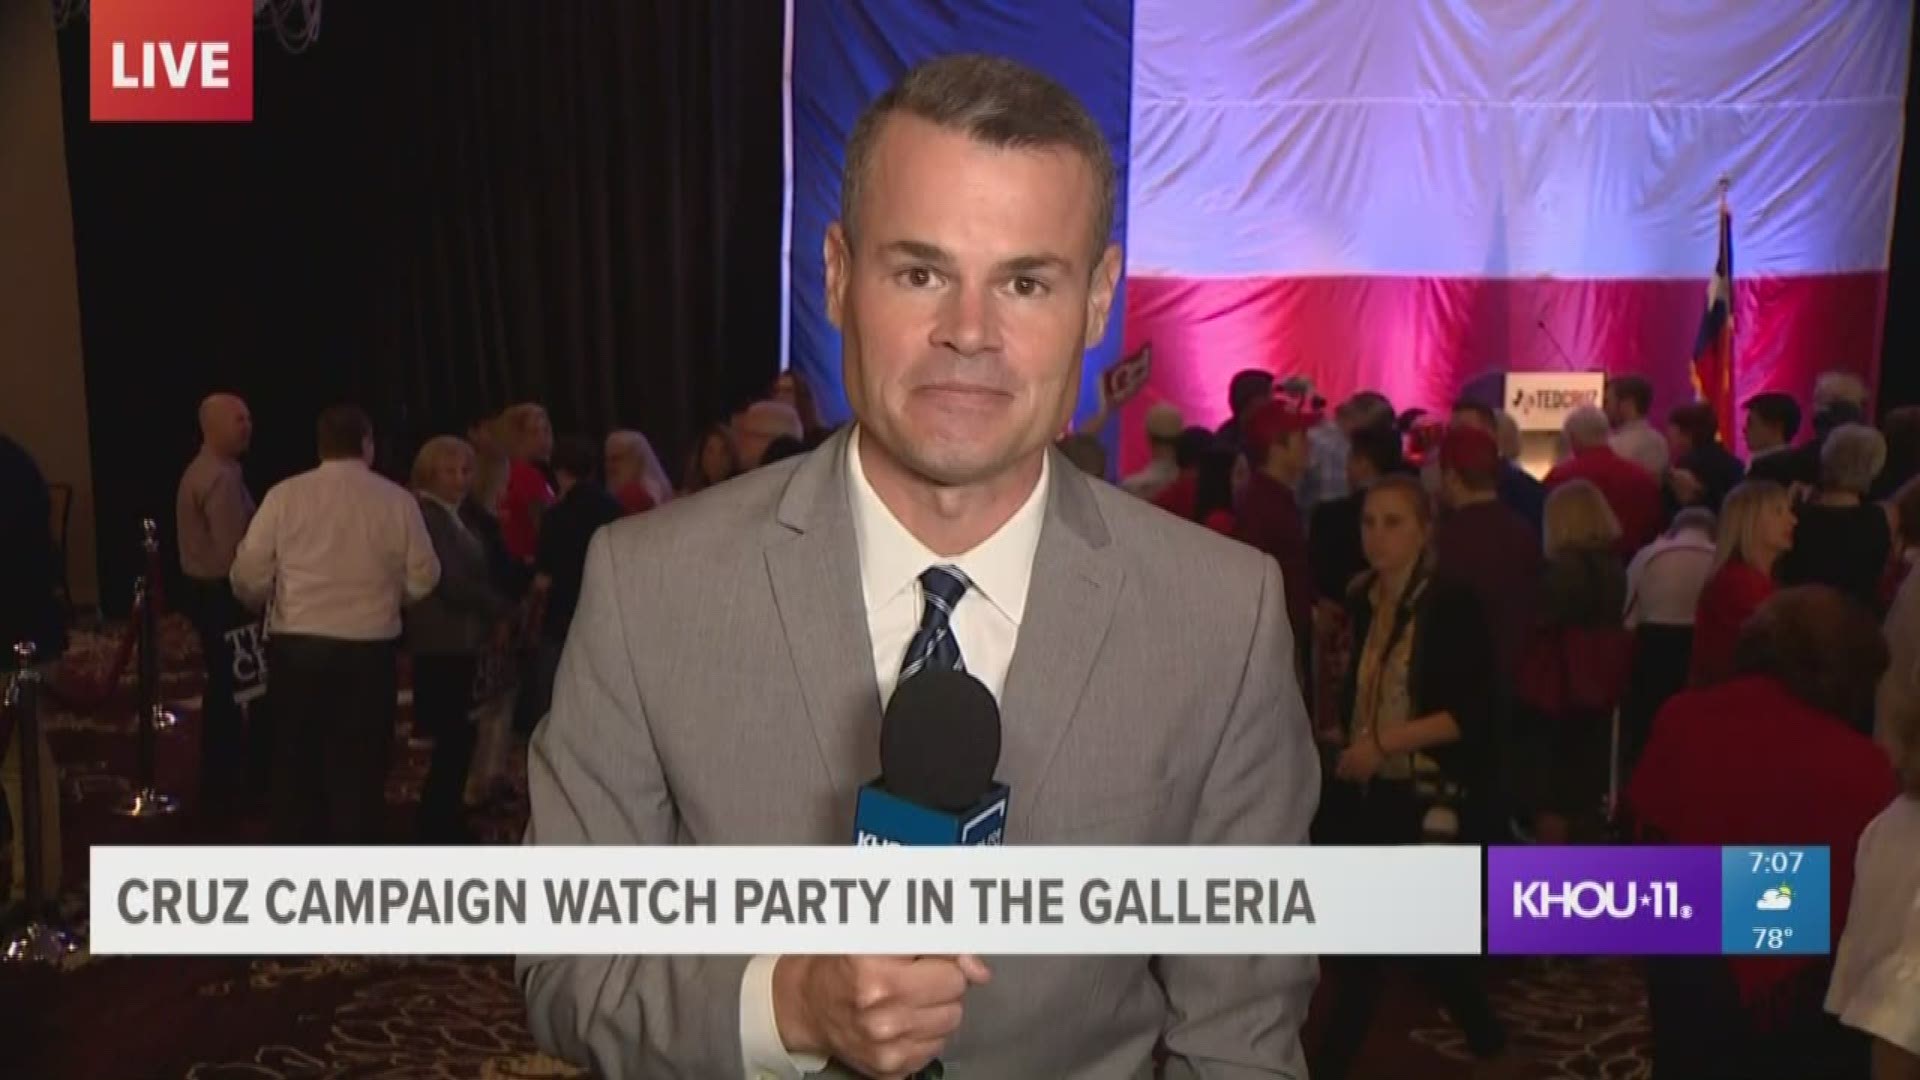 Many supporters attended the Cruz campaign watch party in the Galleria Tuesday night as they await election results.